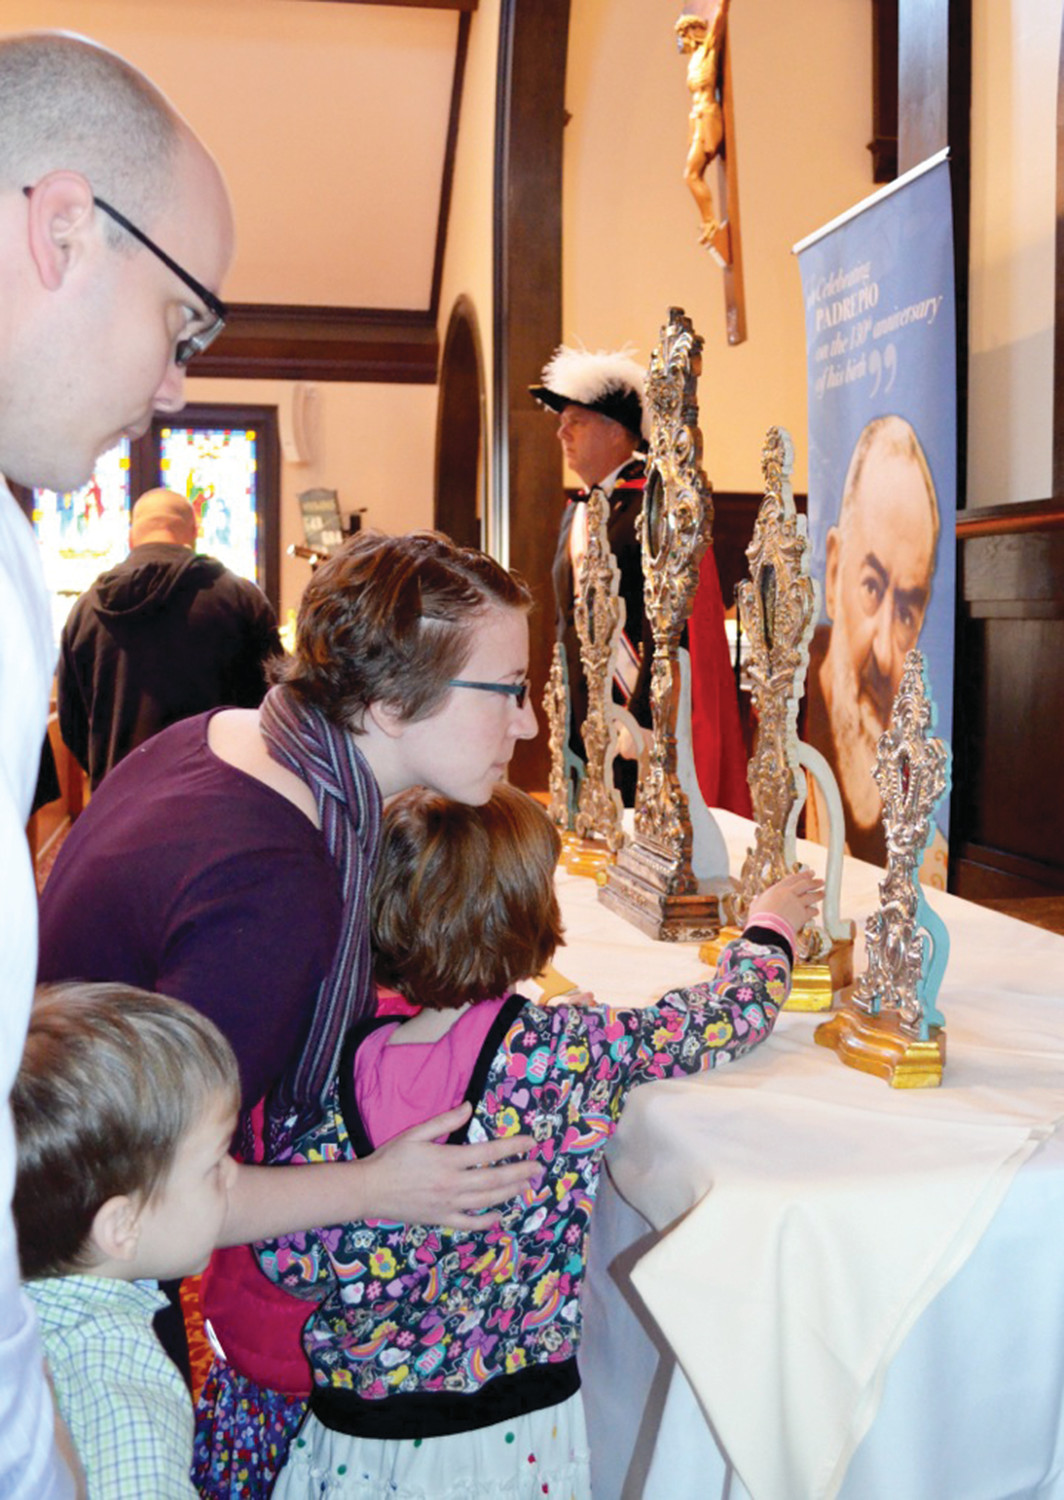 Families admire the relics on display.